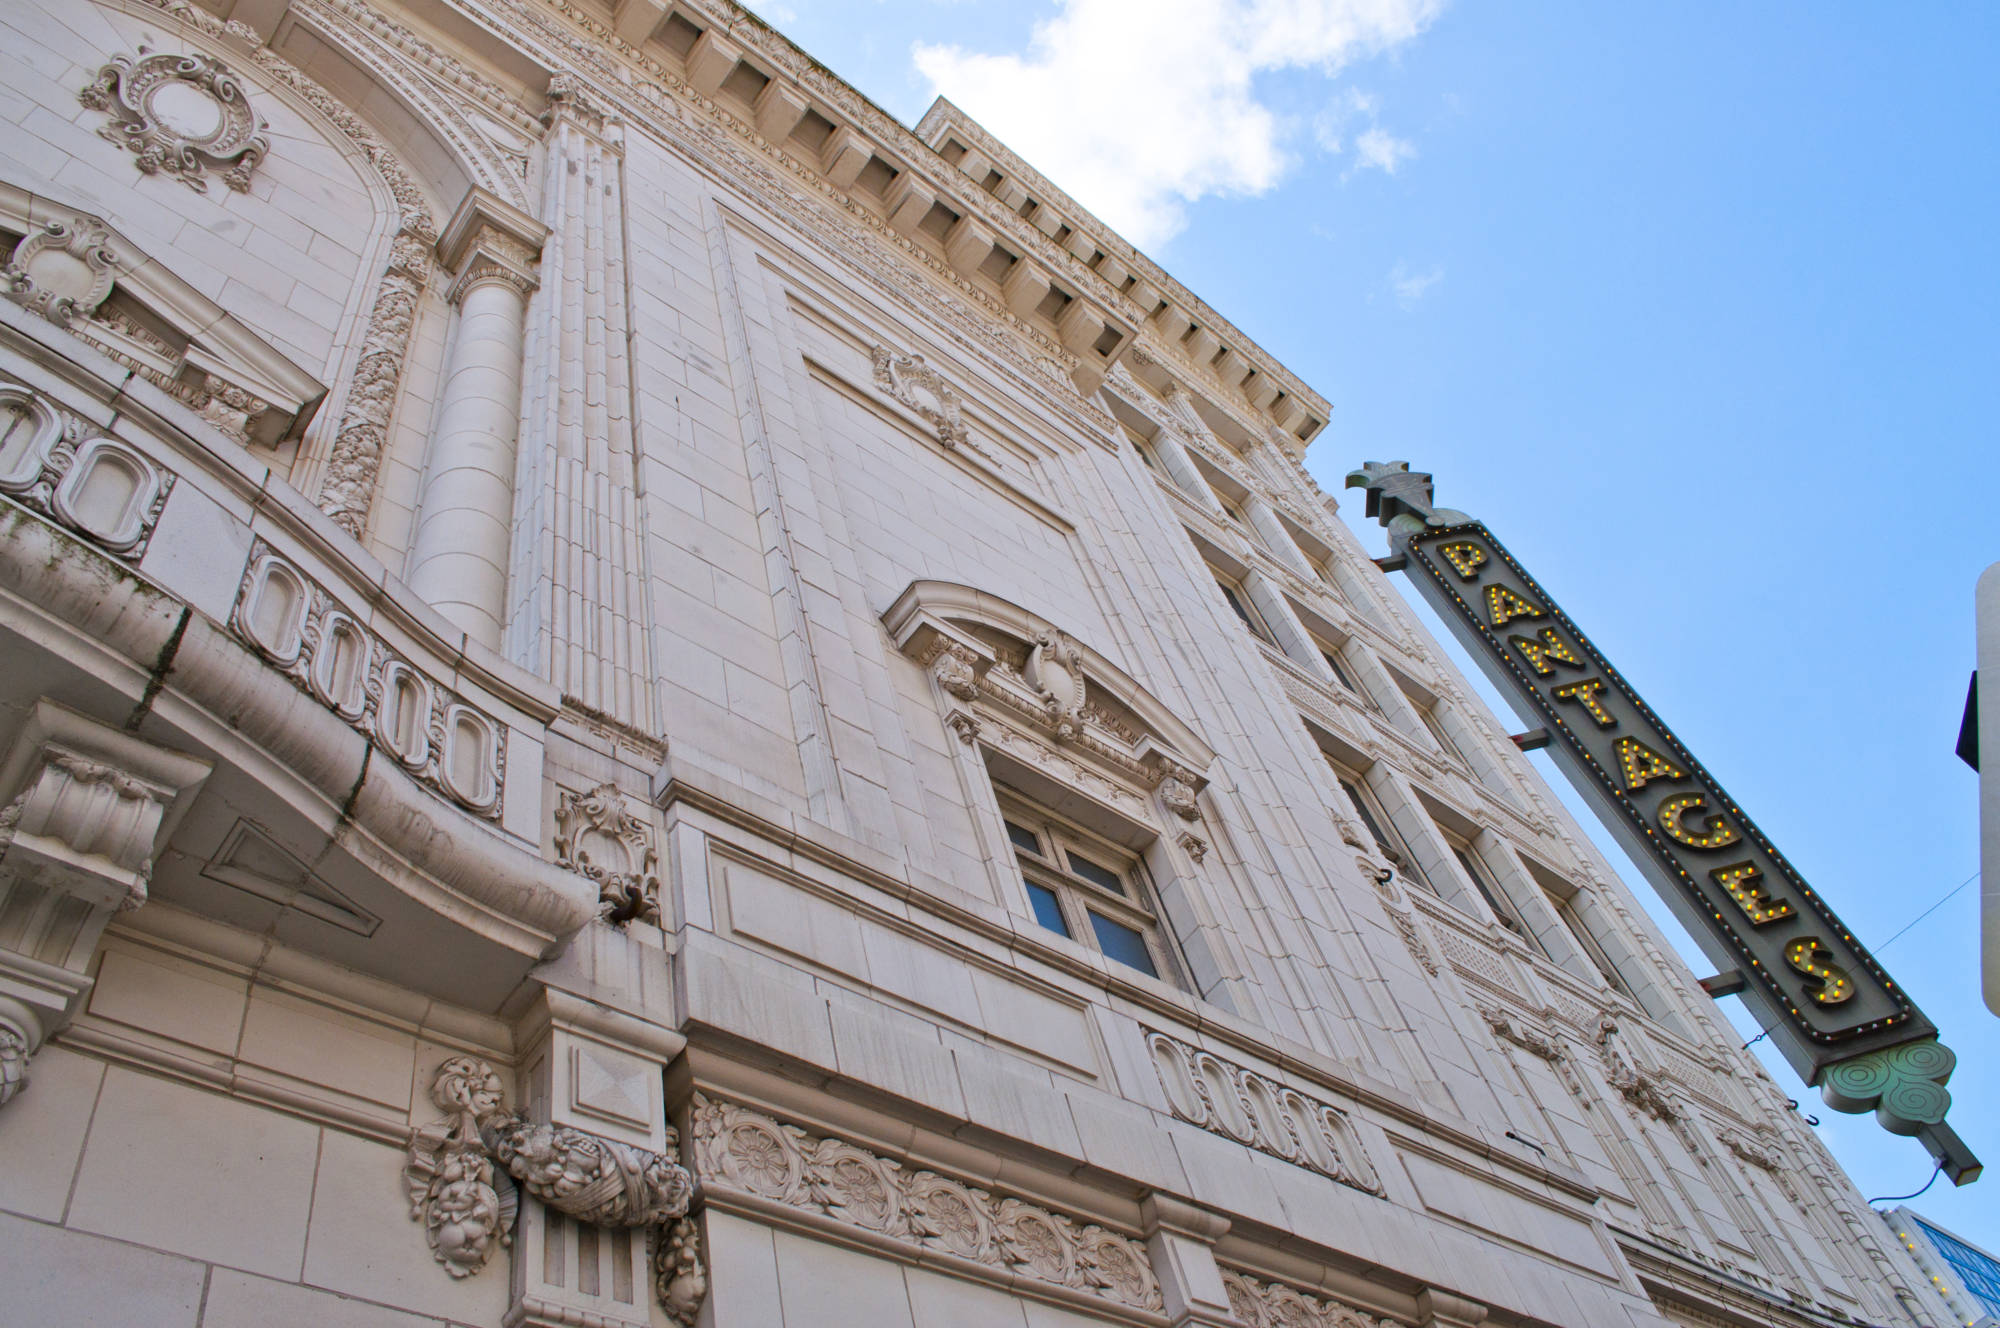 Pantages Theater in downtown Tacoma, just a short drive from Kent, Washington